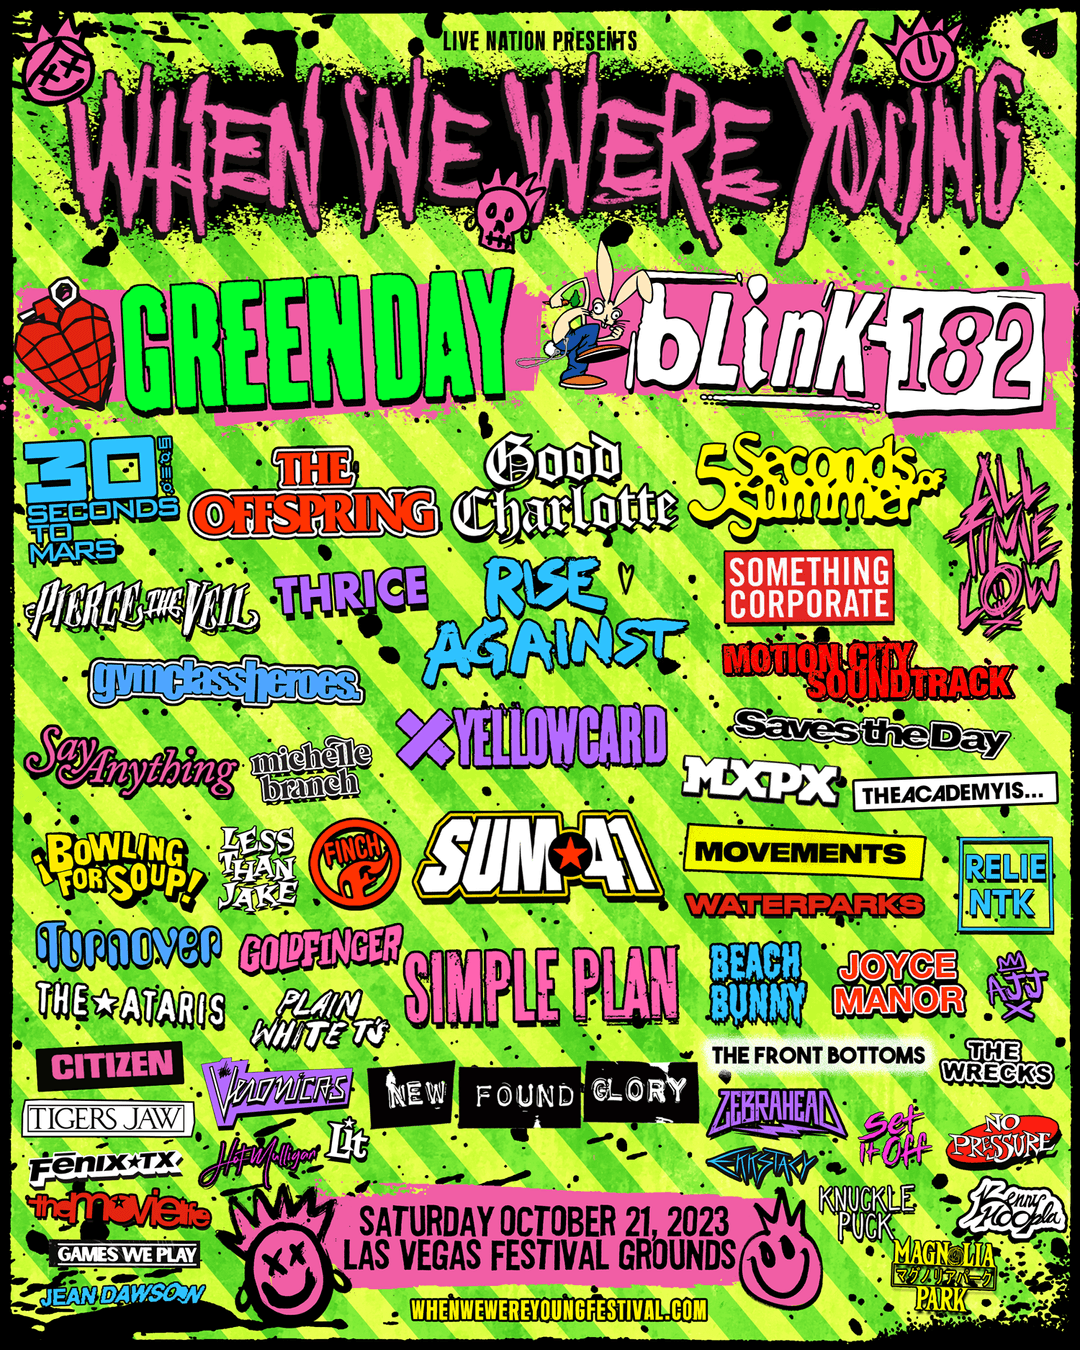 When We Were Young's 2023 lineup includes Green Day and Blink-182